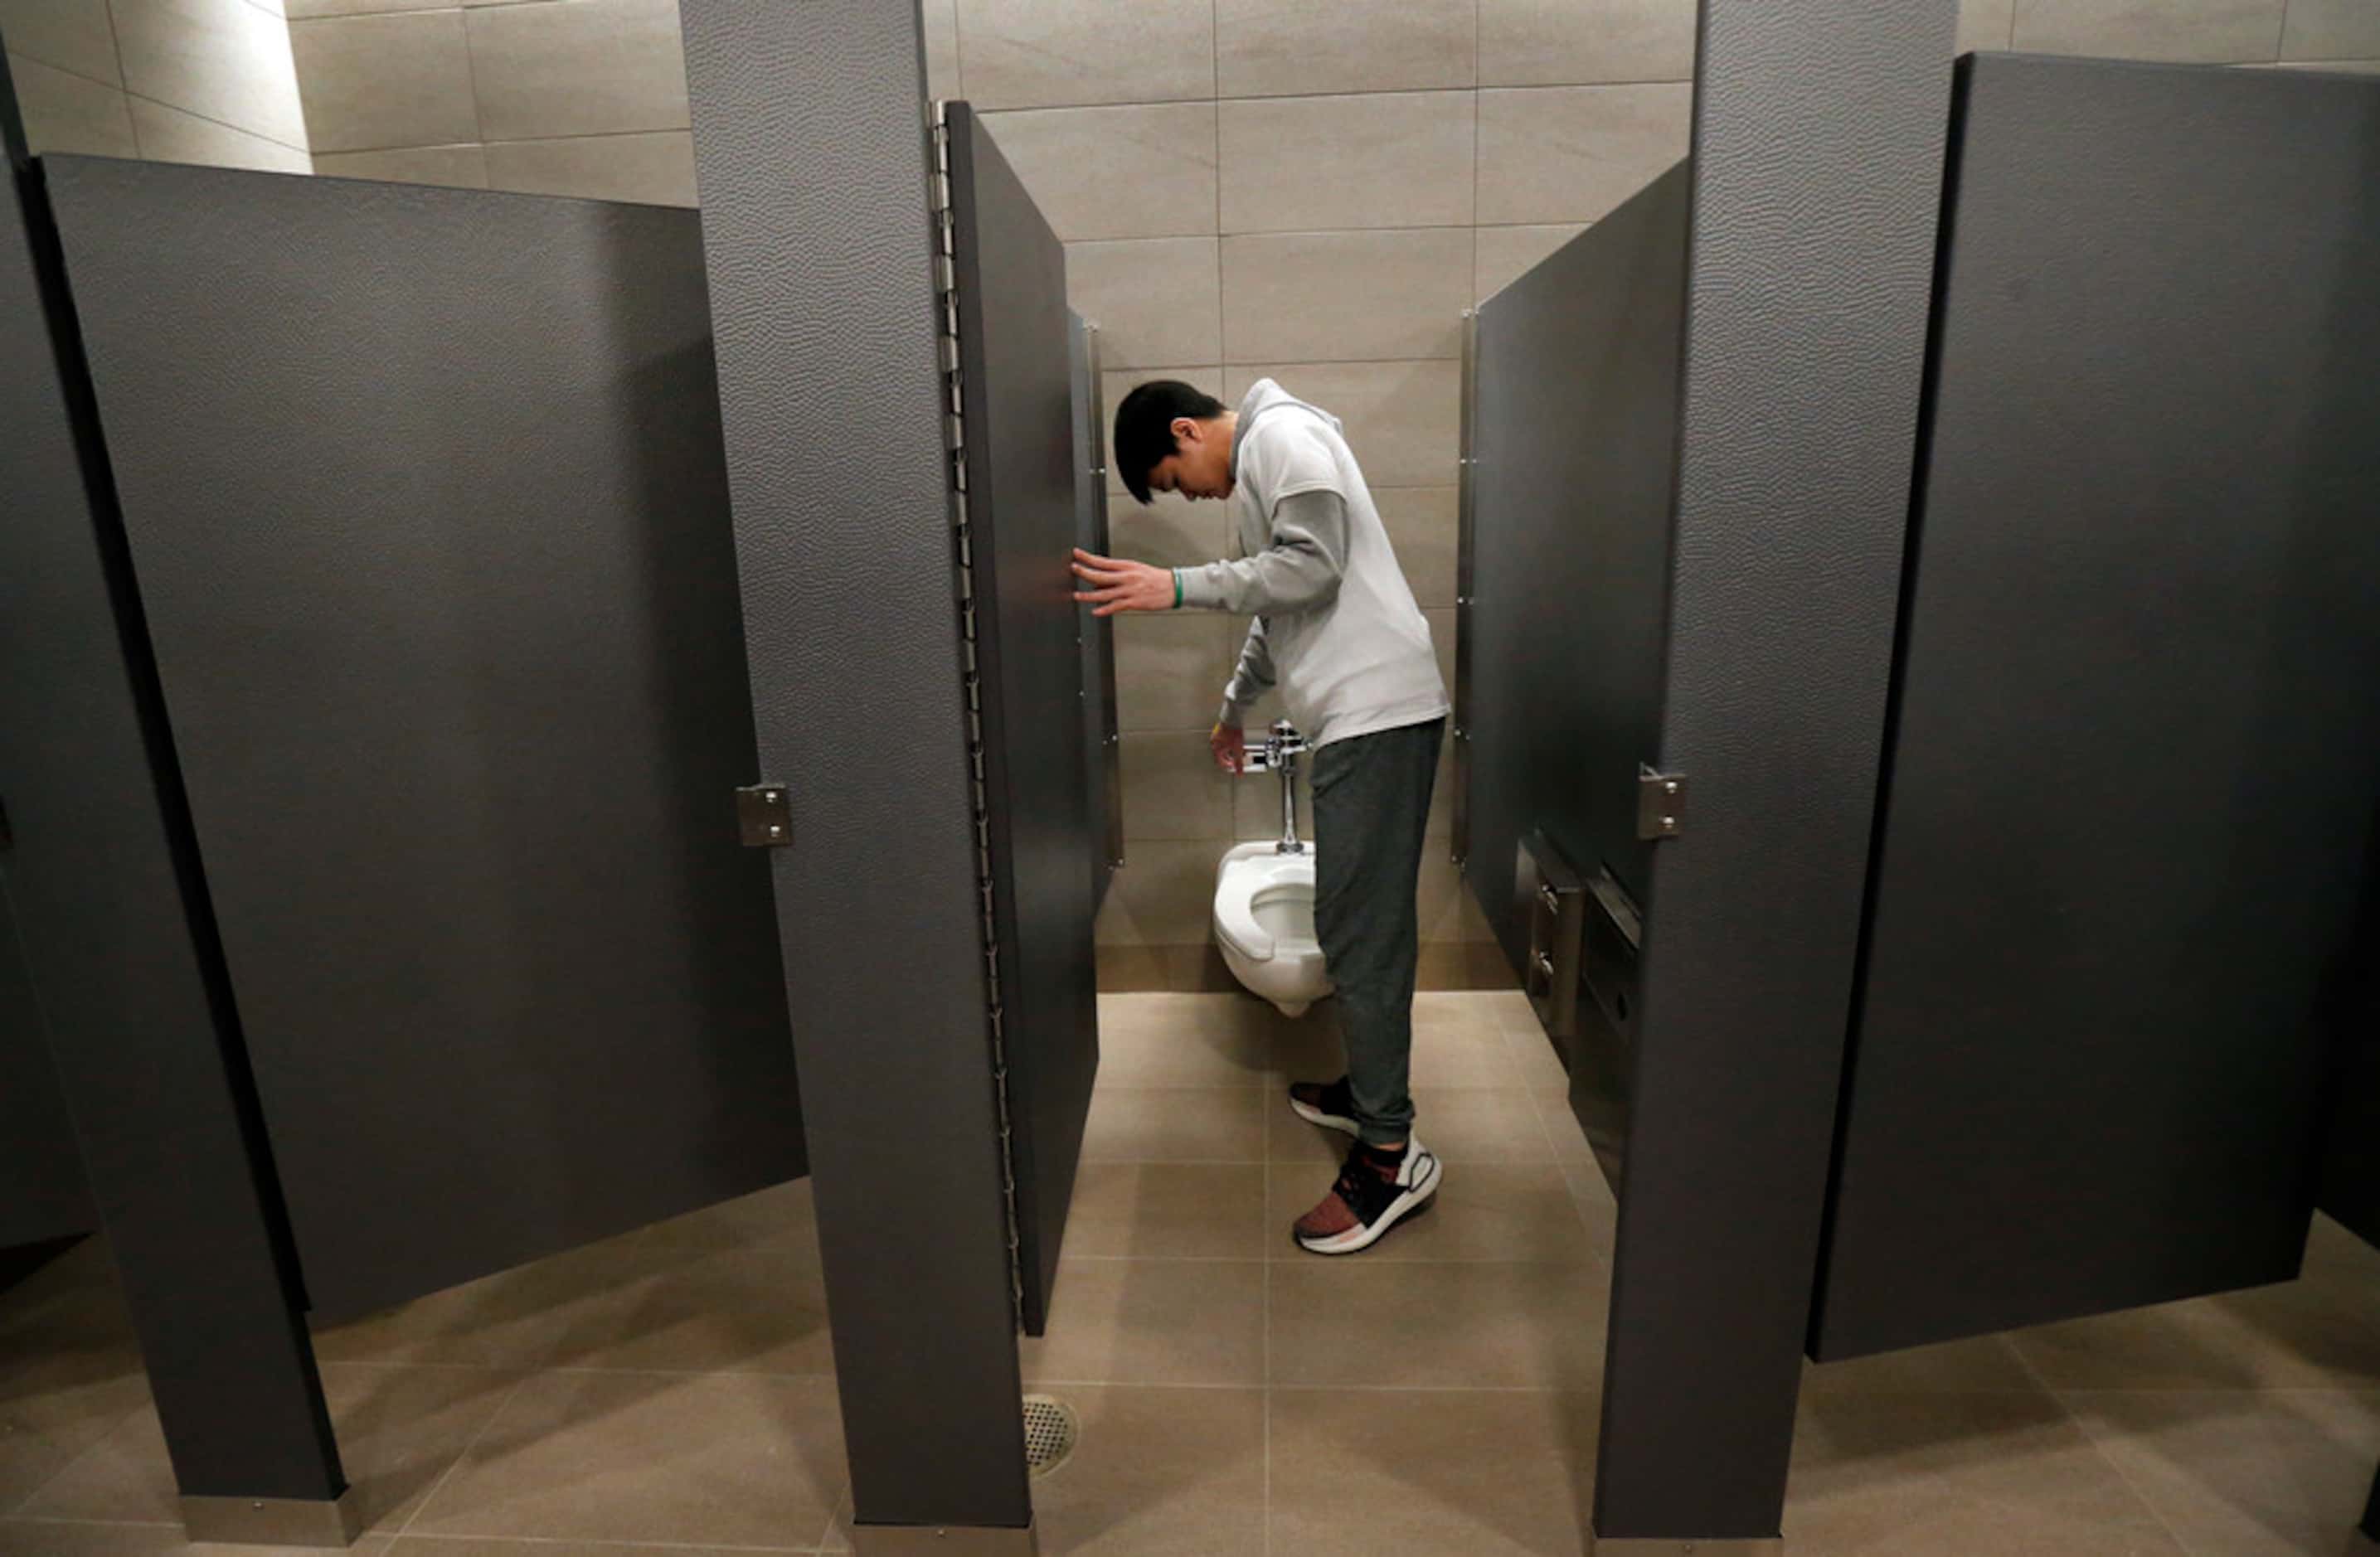 Arlington High School student Tri Nguyen participated in the Super Flush, a mass flushing of...